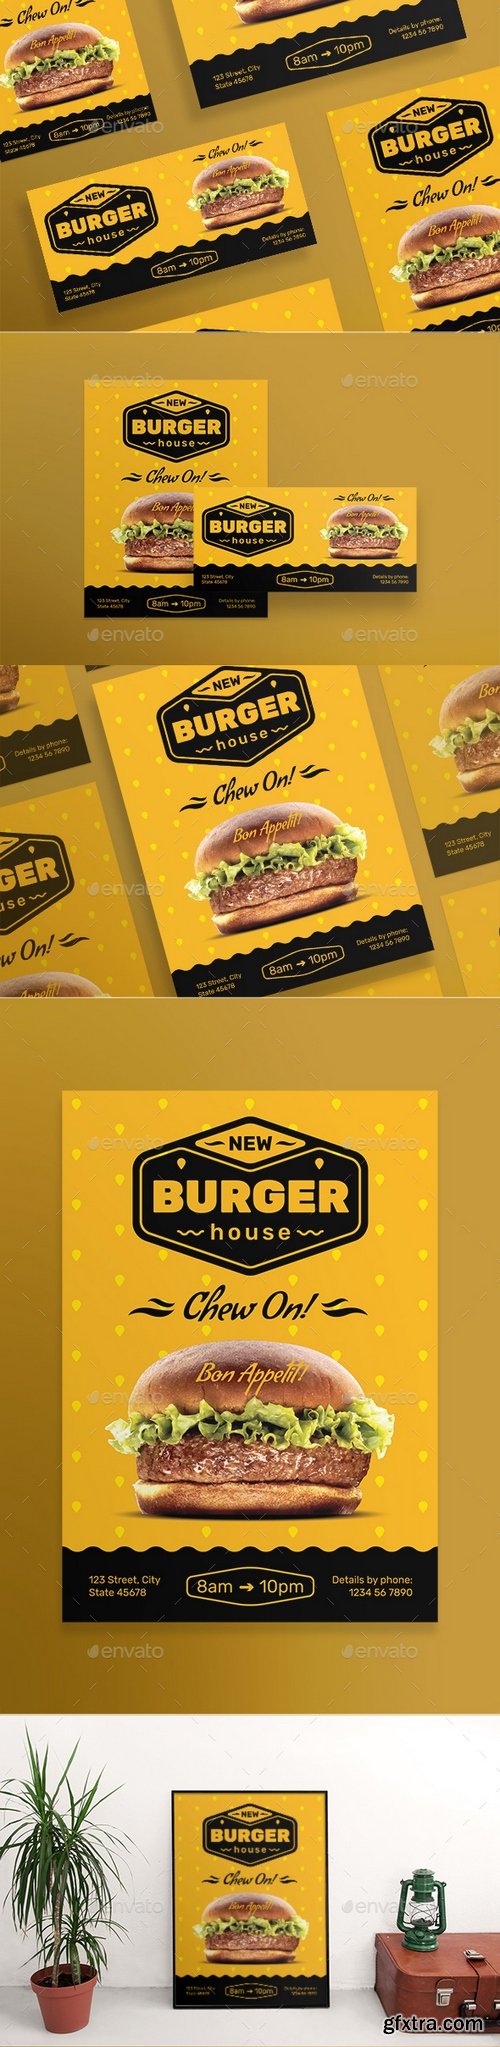 Graphicriver - Burger House Banner Pack 20835632